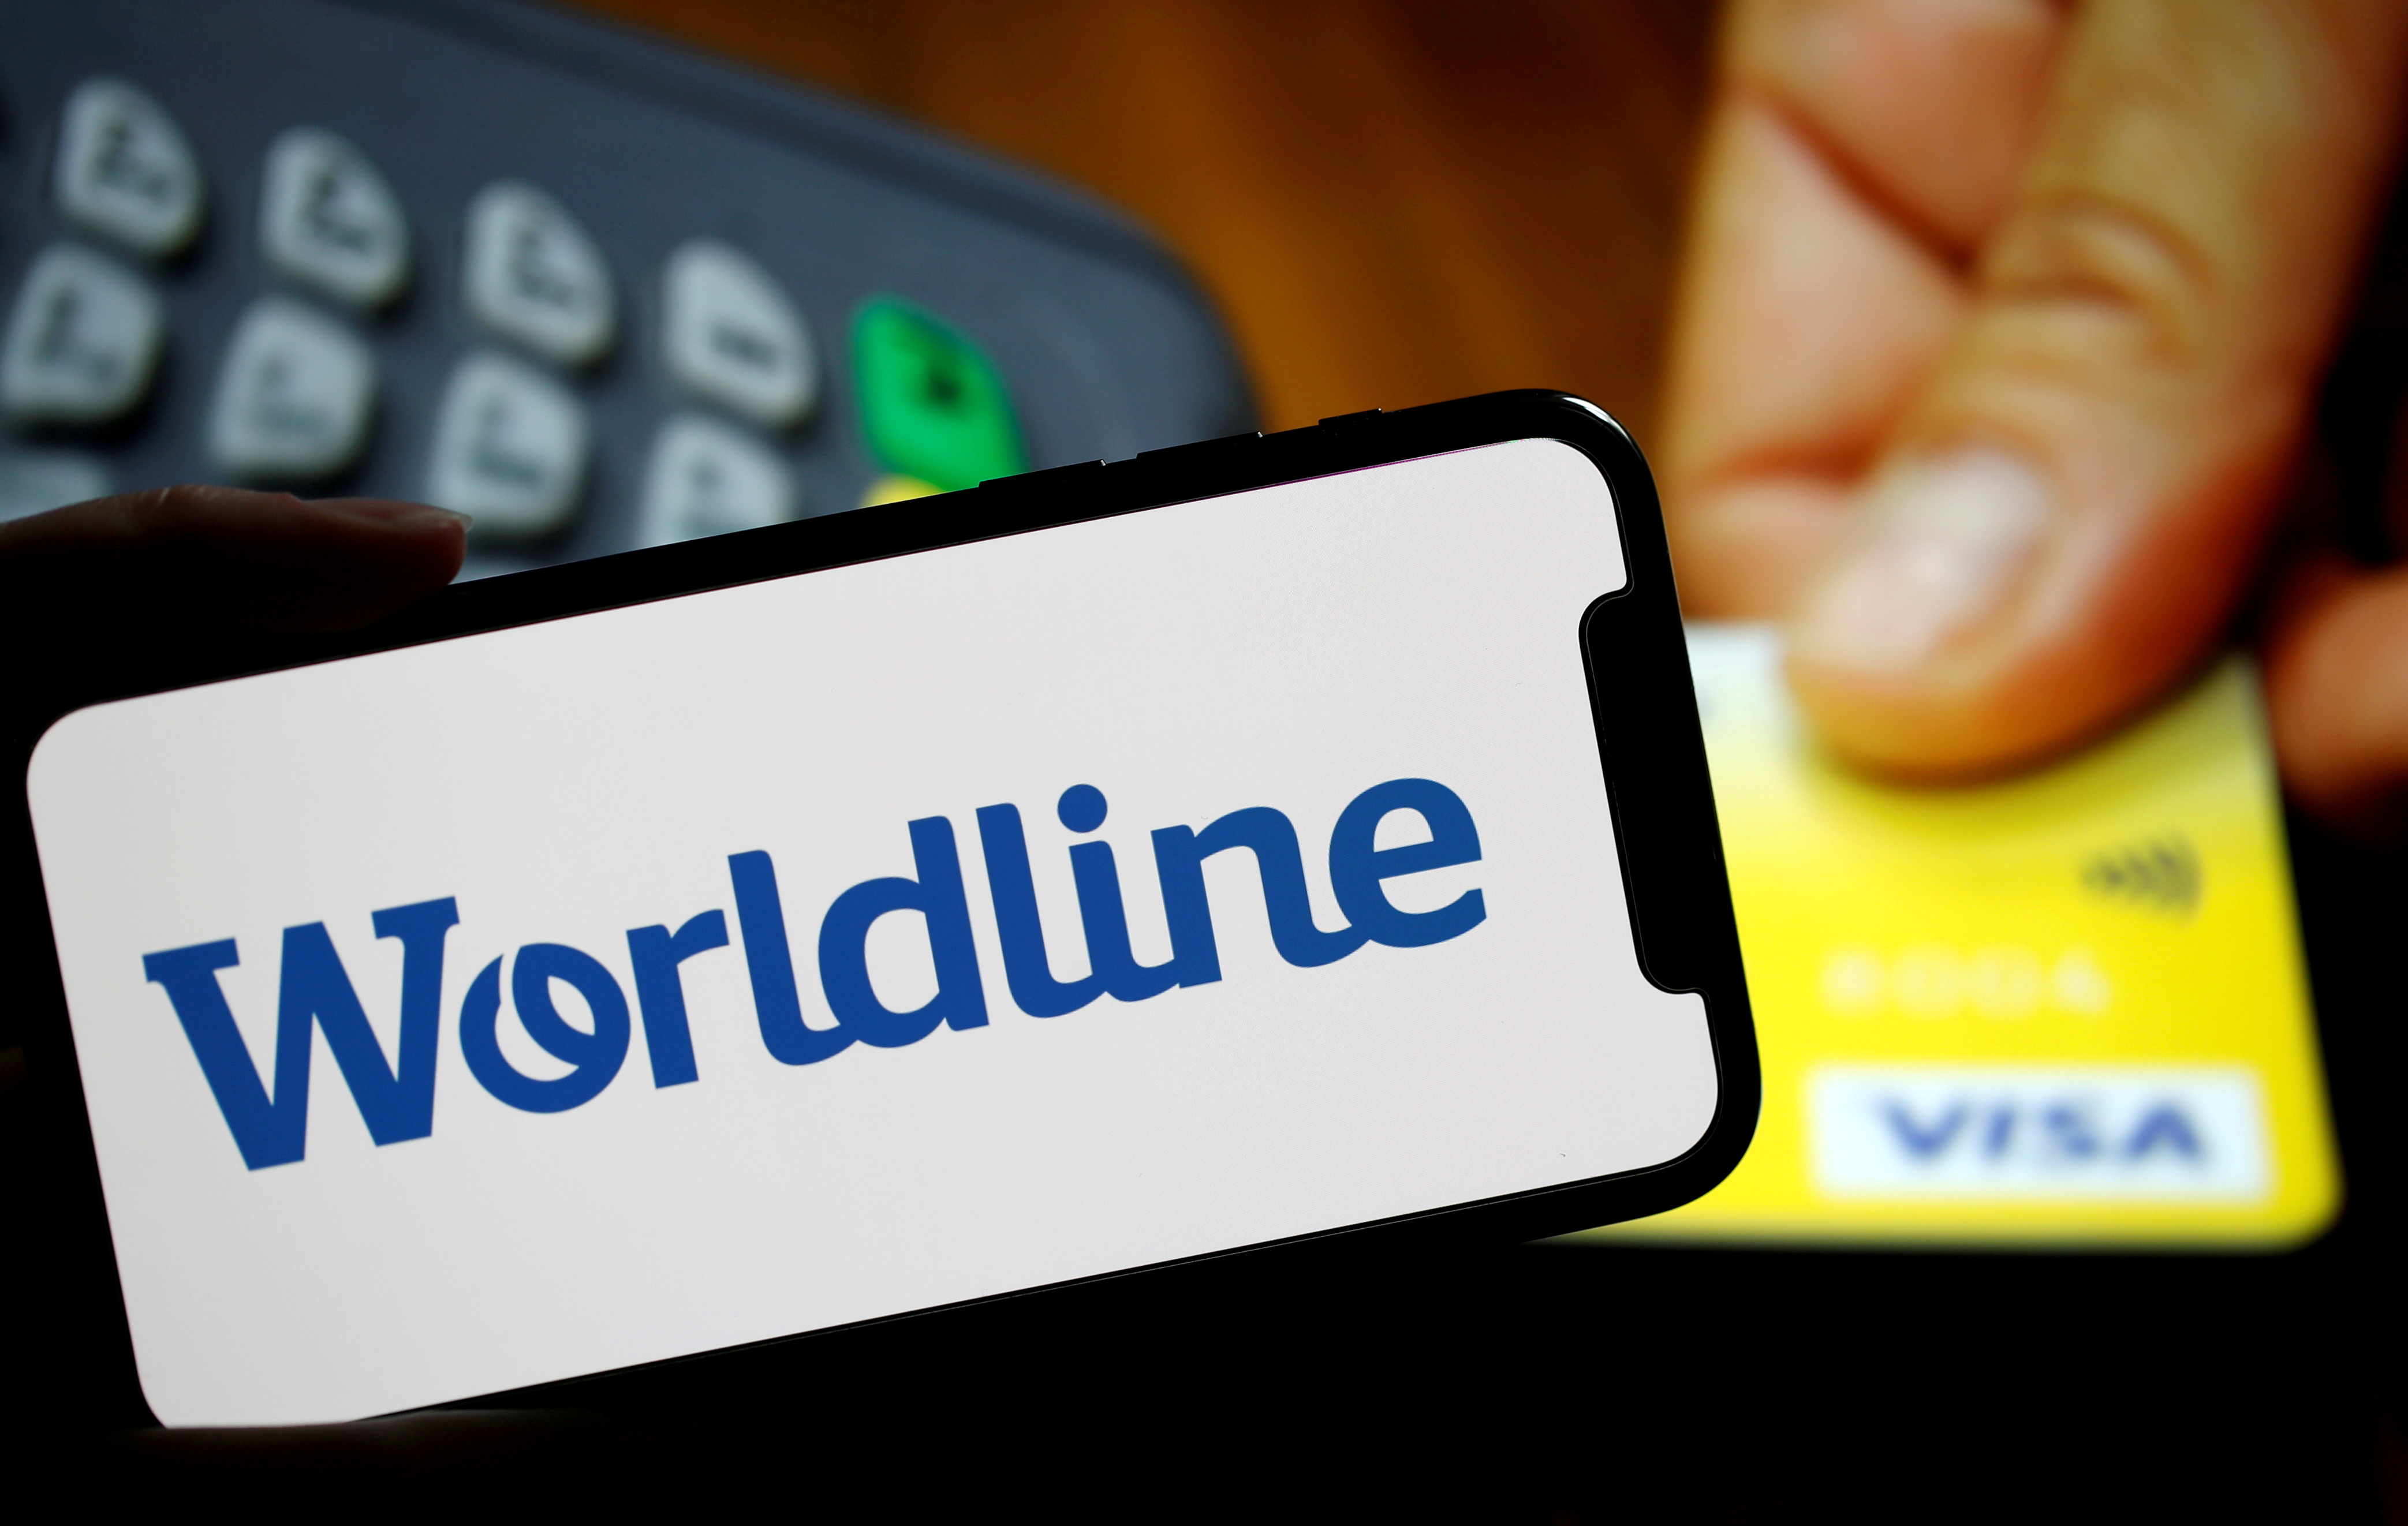 Illustration picture shows a logo of payments company Worldline